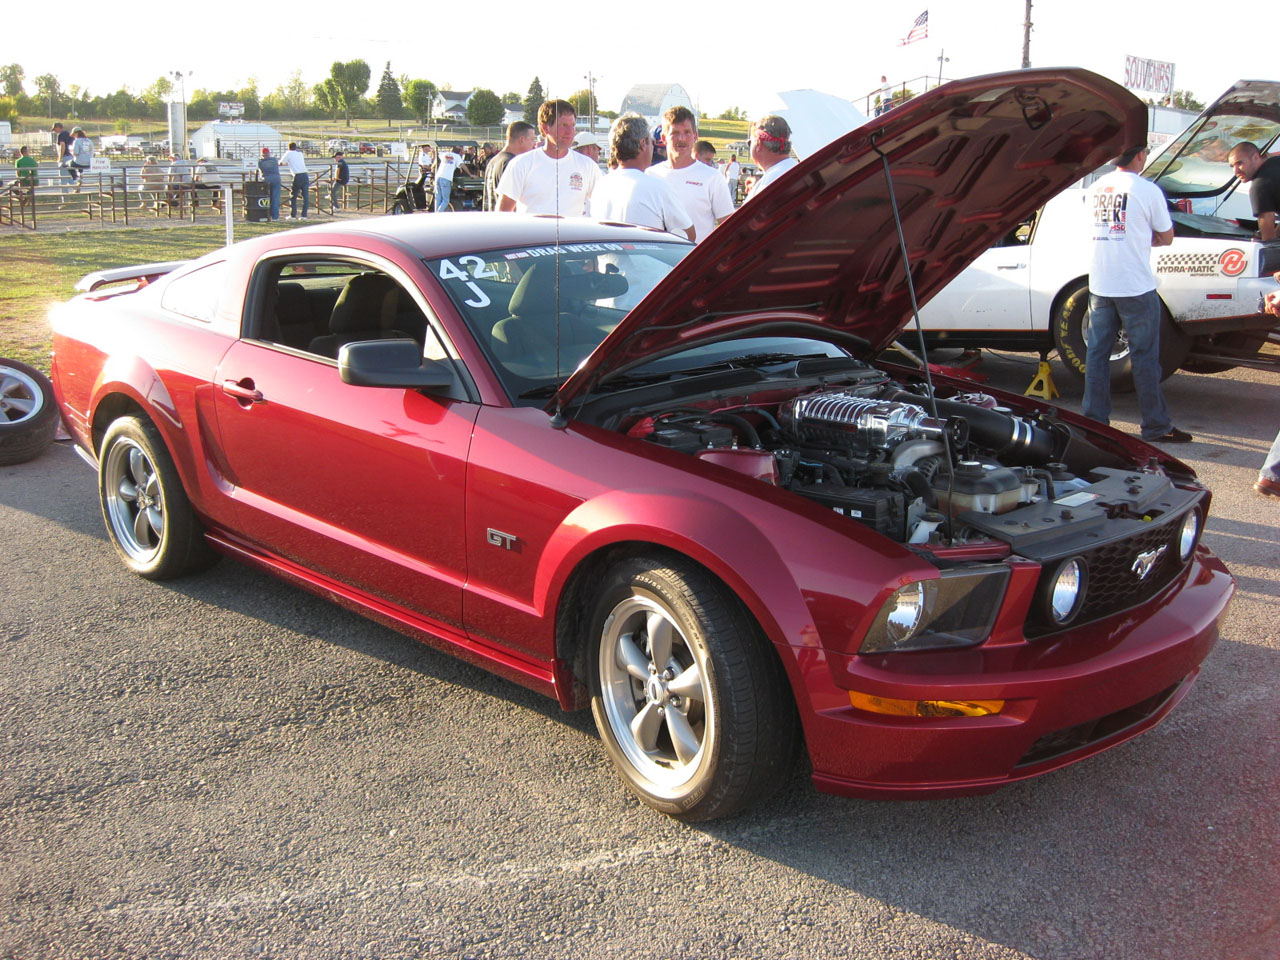 2006 Ford mustang gt 0 to 60 #3